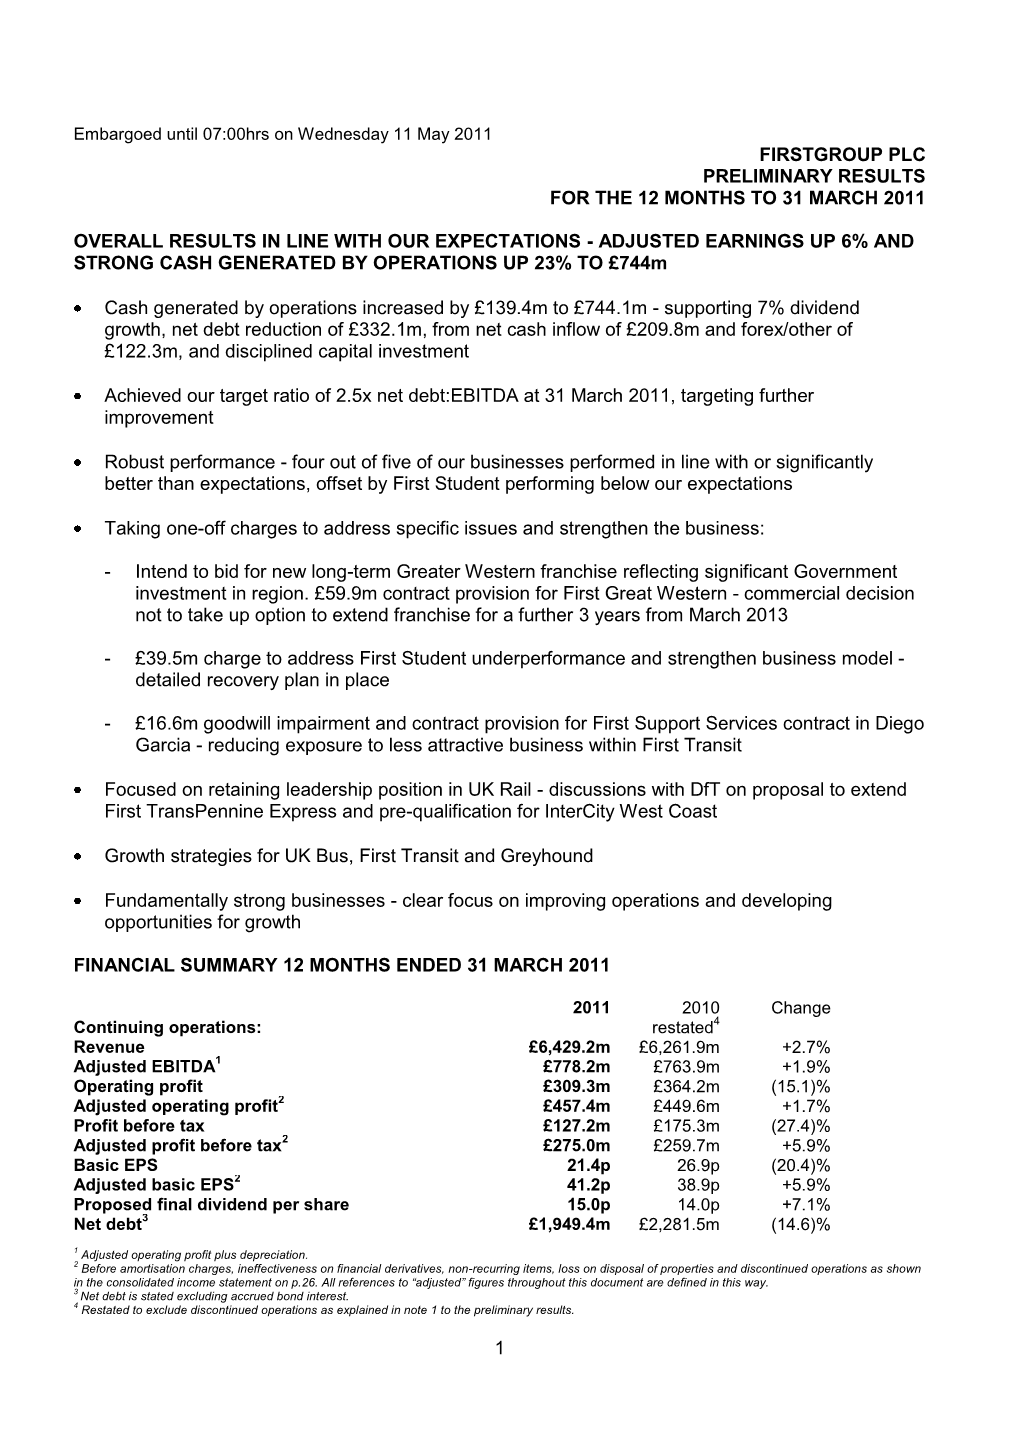 Firstgroup Plc Preliminary Results for the 12 Months to 31 March 2011